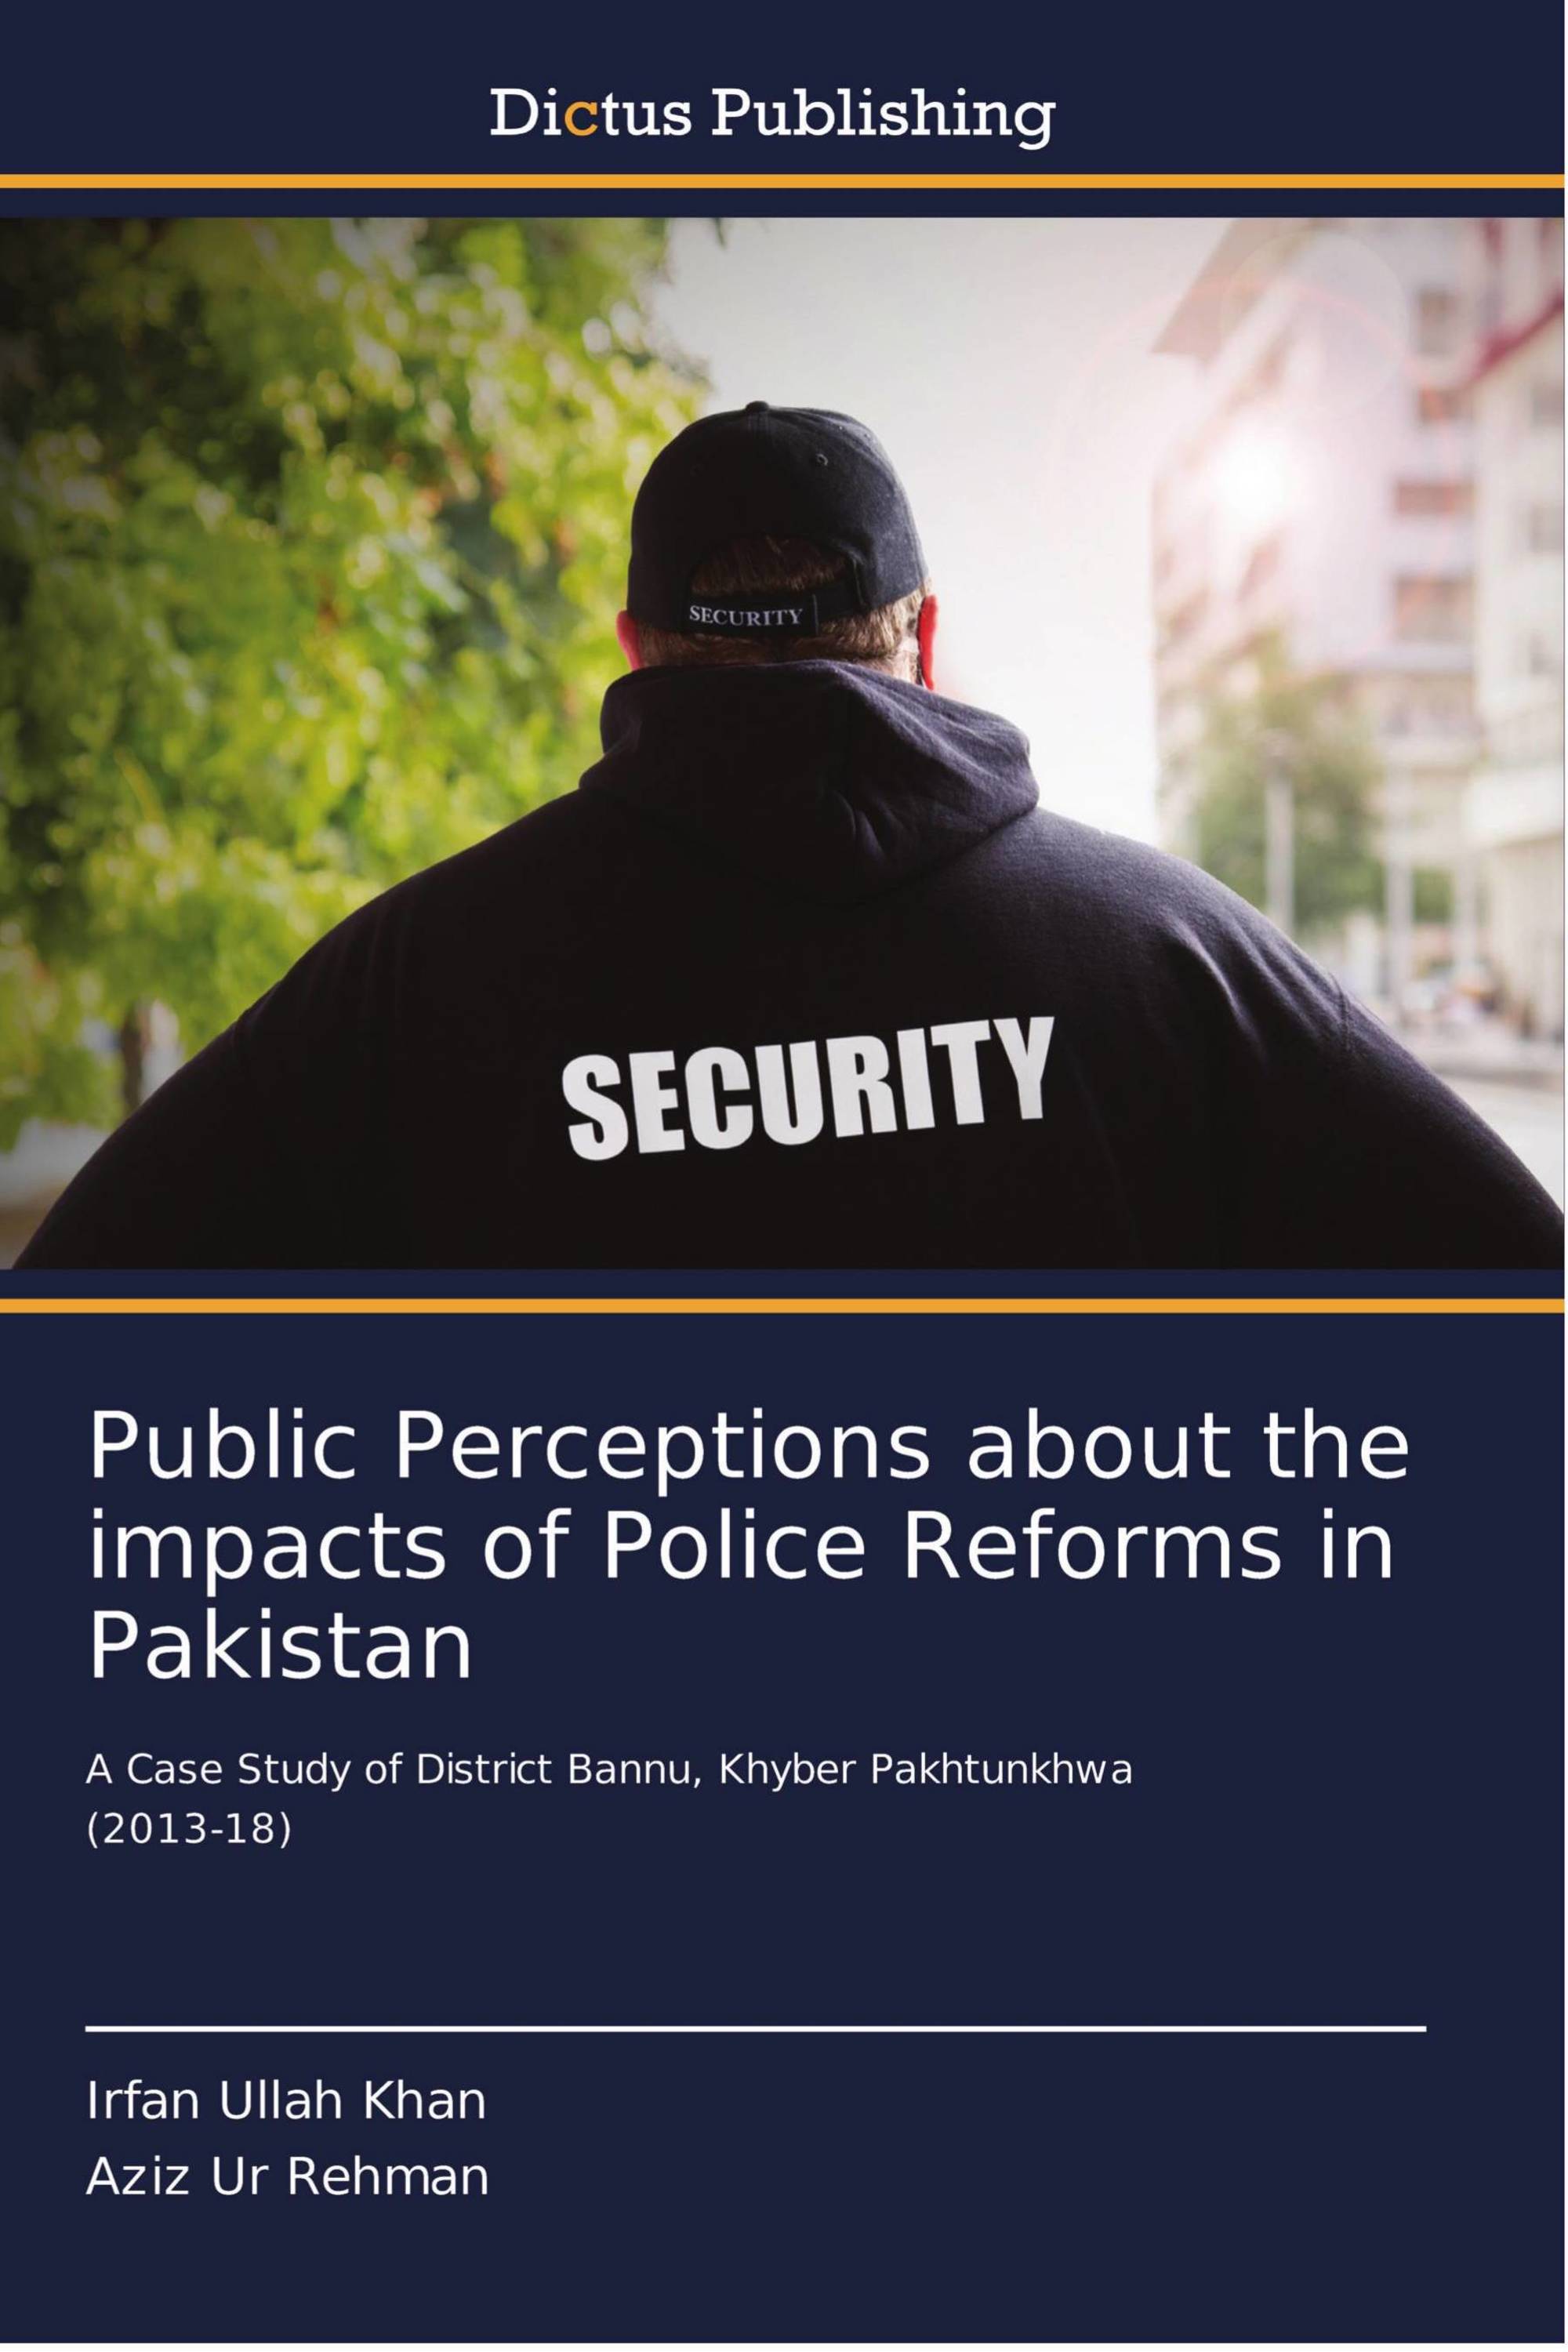 Public Perceptions about the impacts of Police Reforms in Pakistan